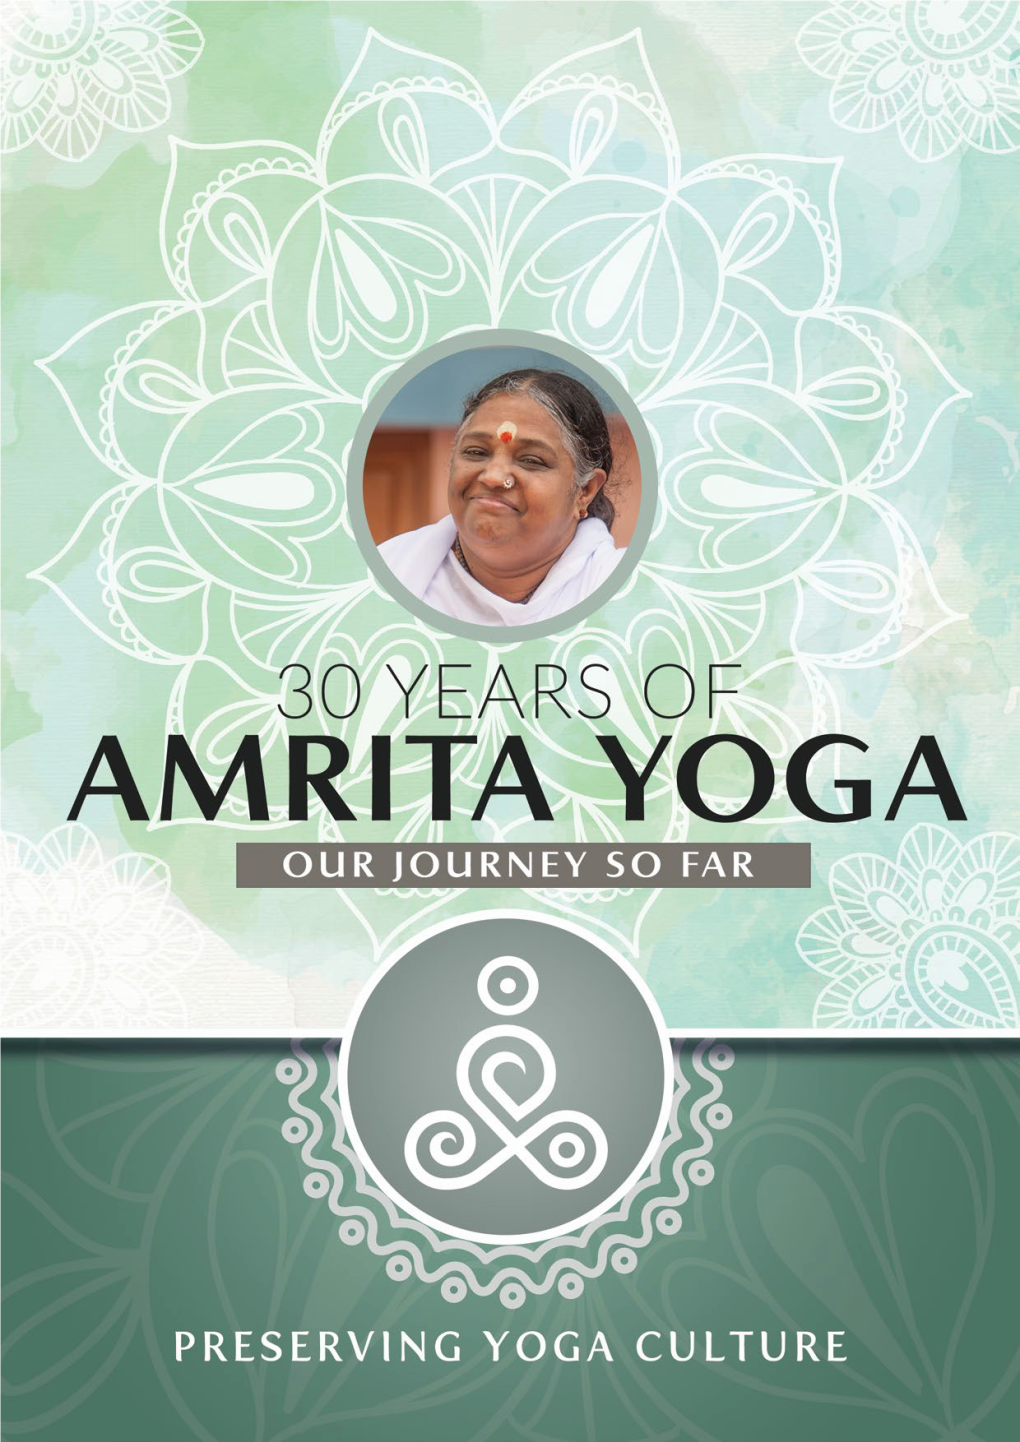 Amrita Yoga Stems from Origins That Have Been Part of India’S Lifestyle from P 10 Time Immemorial.Families Have Practiced Yoga Together in the Same